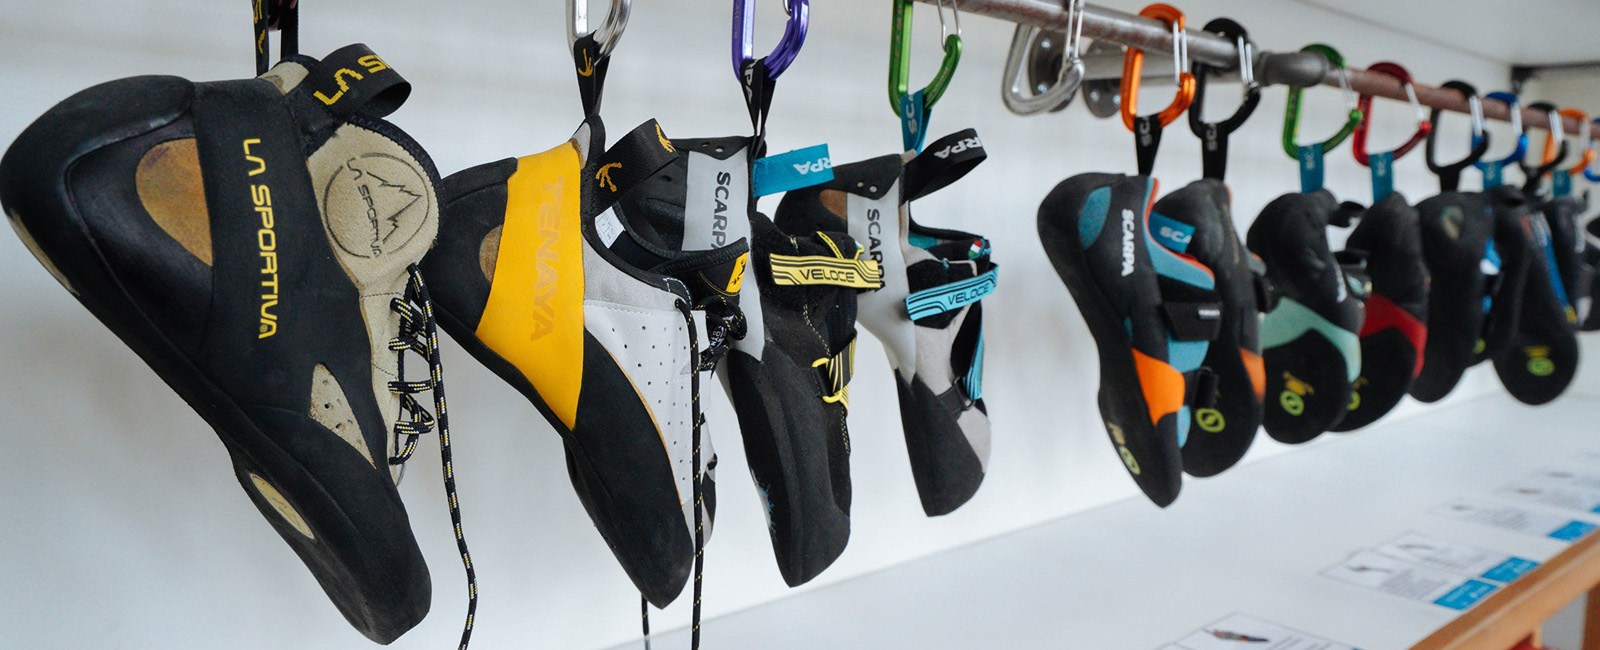 group of climbing shoes on a rack